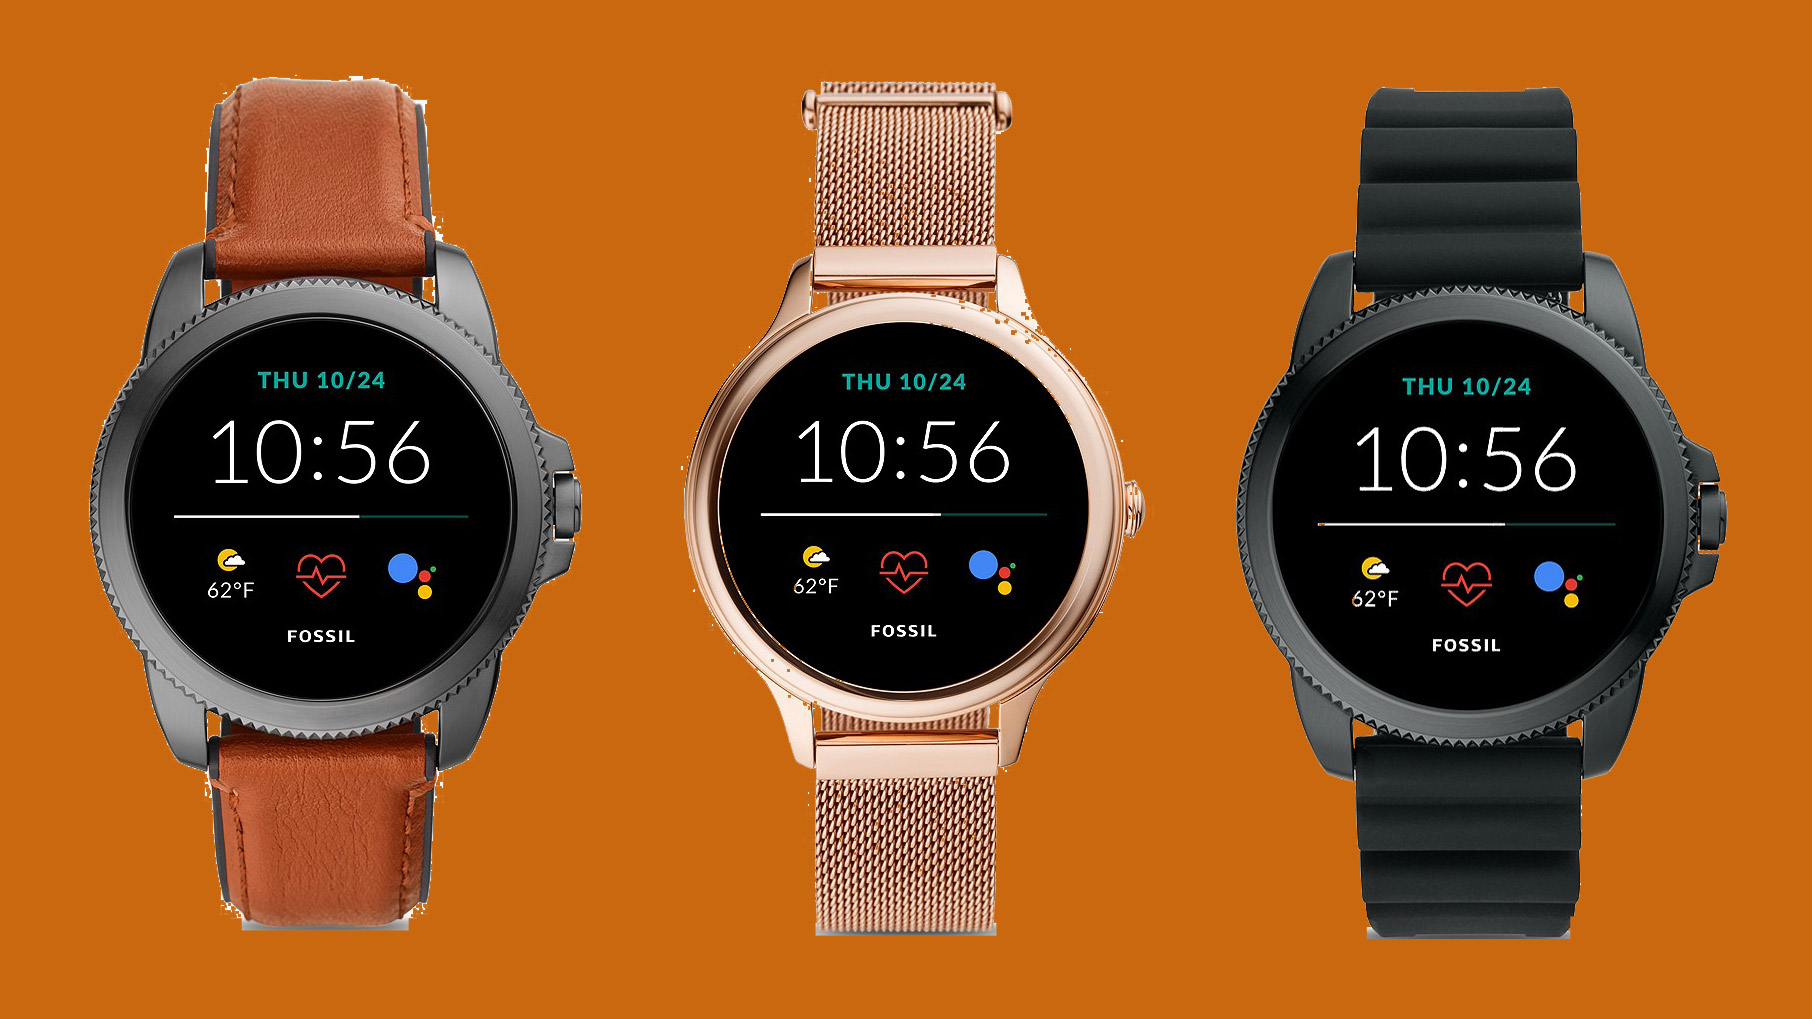 Fossil Gen 5E smartwatch with Wear OS launched at Rs 18,495 | TechRadar